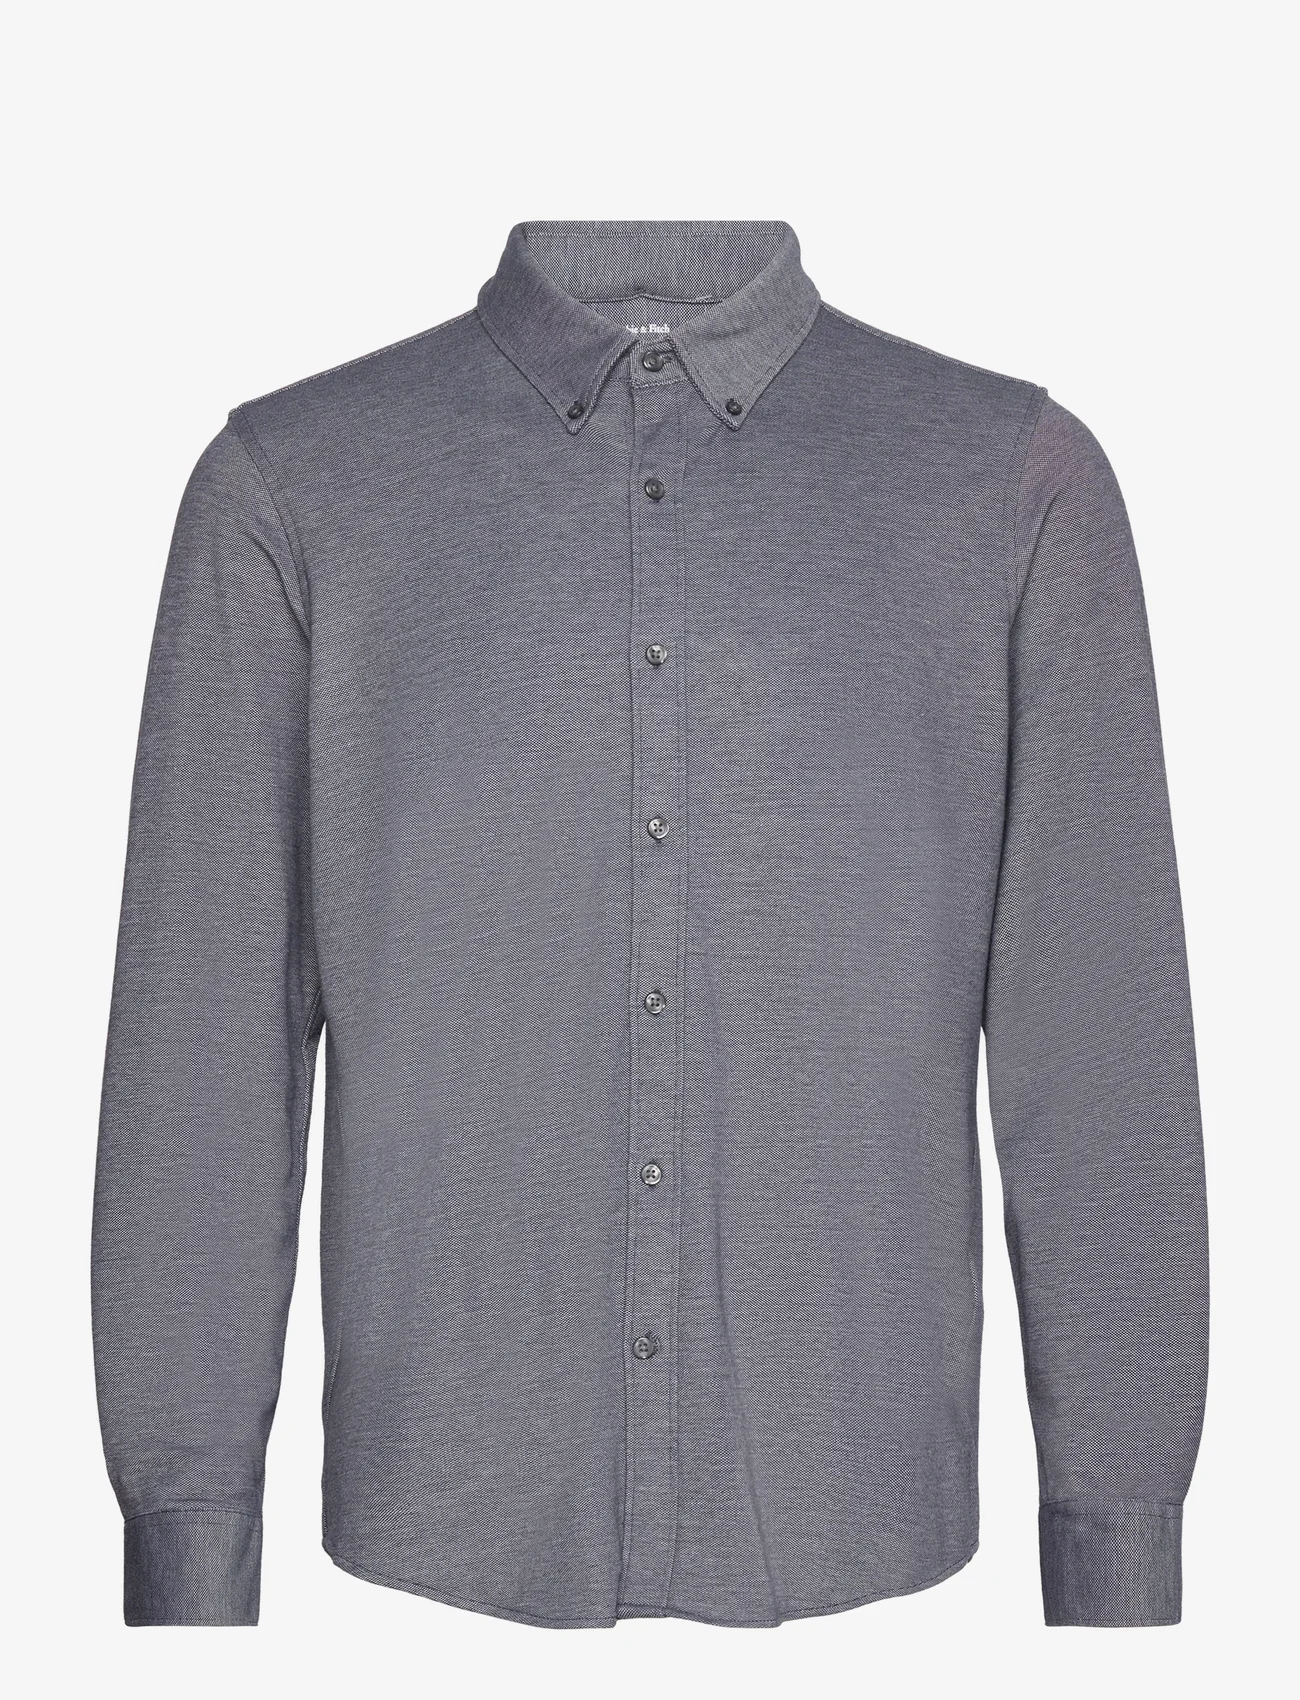 Abercrombie & Fitch - ANF MENS WOVENS - oxford-hemden - blue - 0